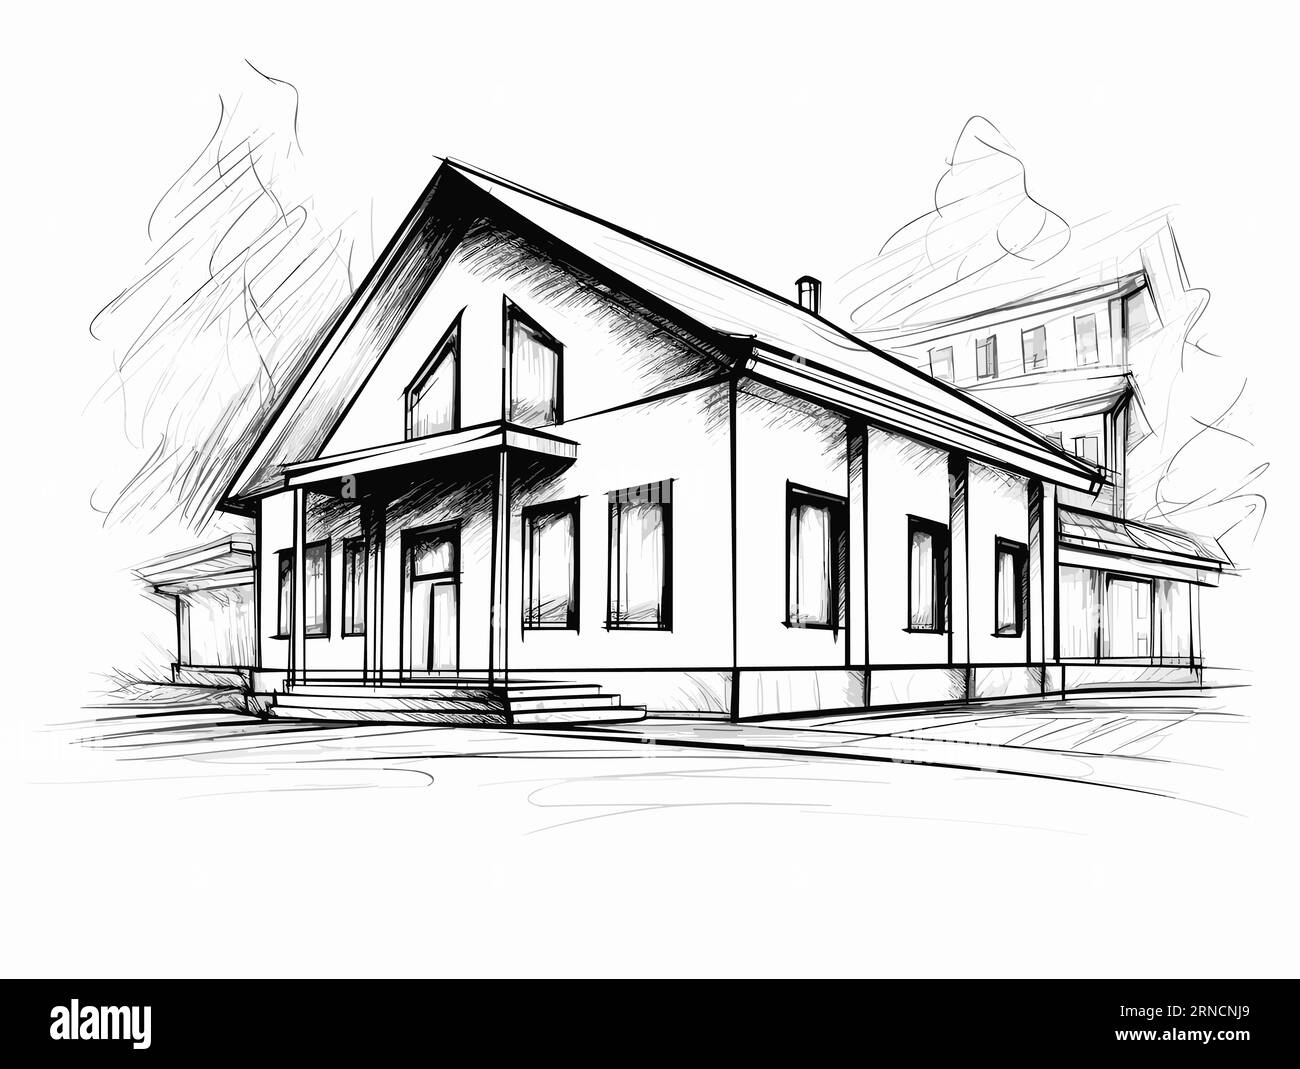 A Black And White Sketch Of A House With Steps In Front, In The Style Of Classic Japanese Simplicity, Energetic And Bold, Sketches, Clear Edge Definit Stock Vector